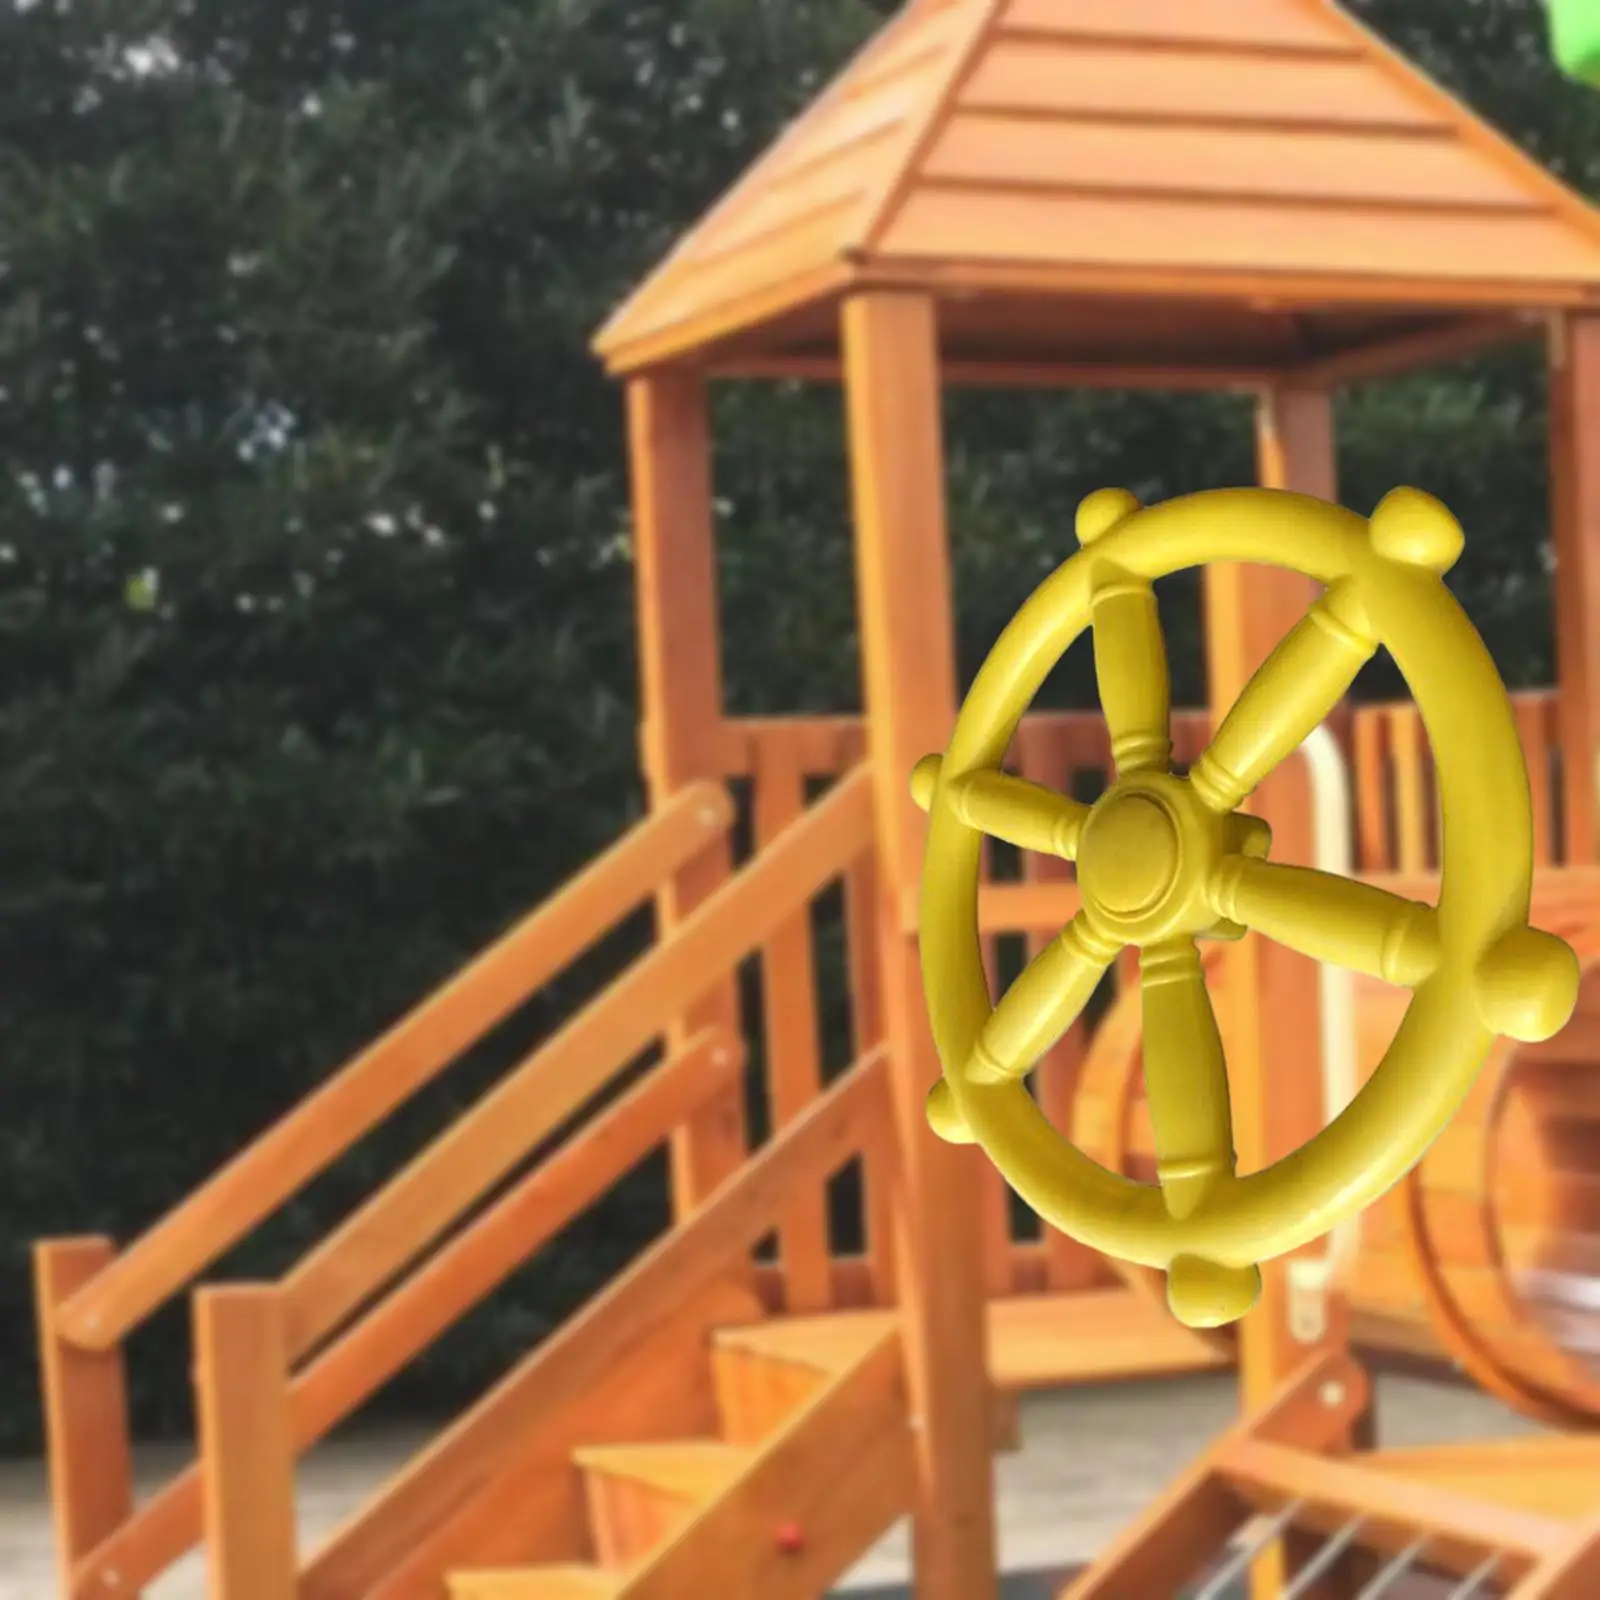 Pirate Ship Wheel Multipurpose Backyard Playset Equipment Playground Accessories for Garden Outdoor Playhouse Treehouse